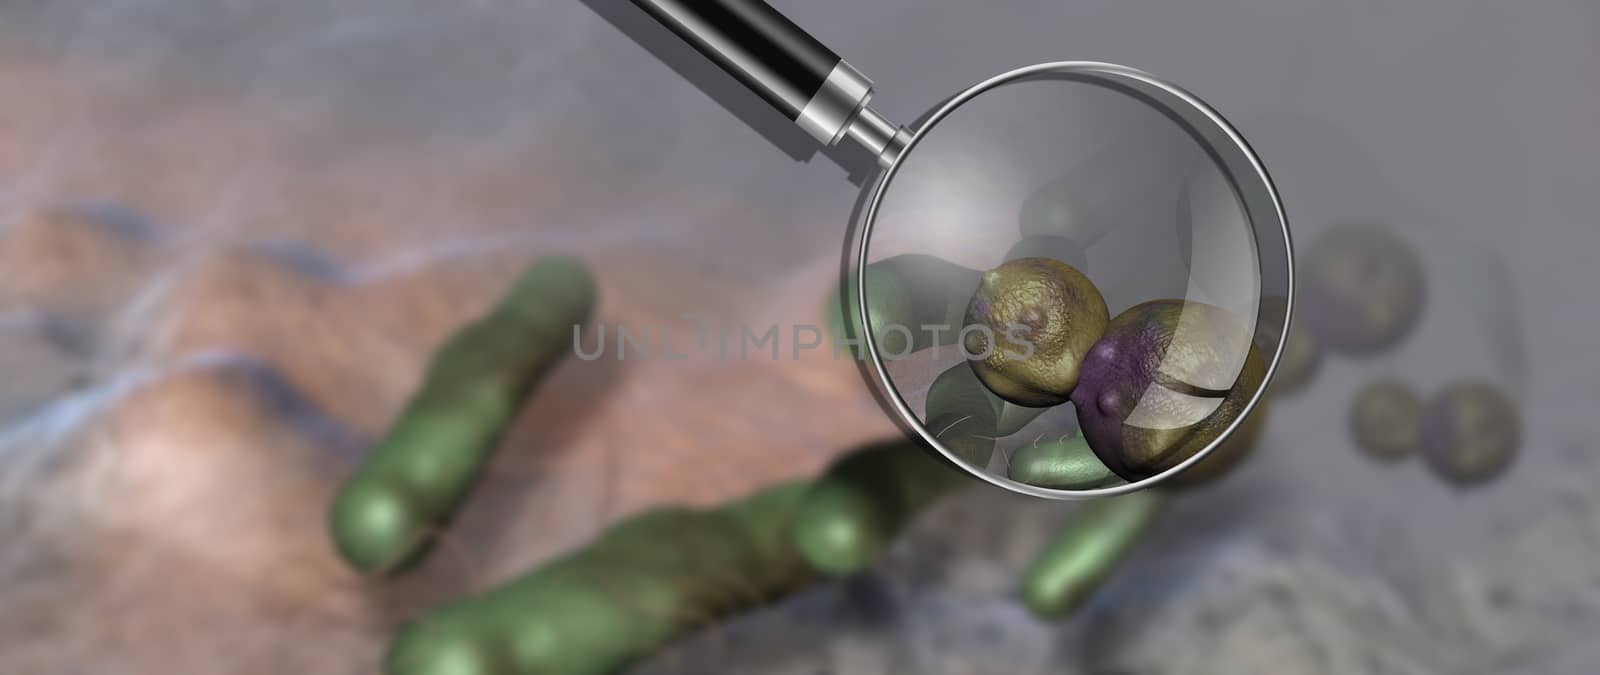 Virus and bacterium background - High Quality 3D Render